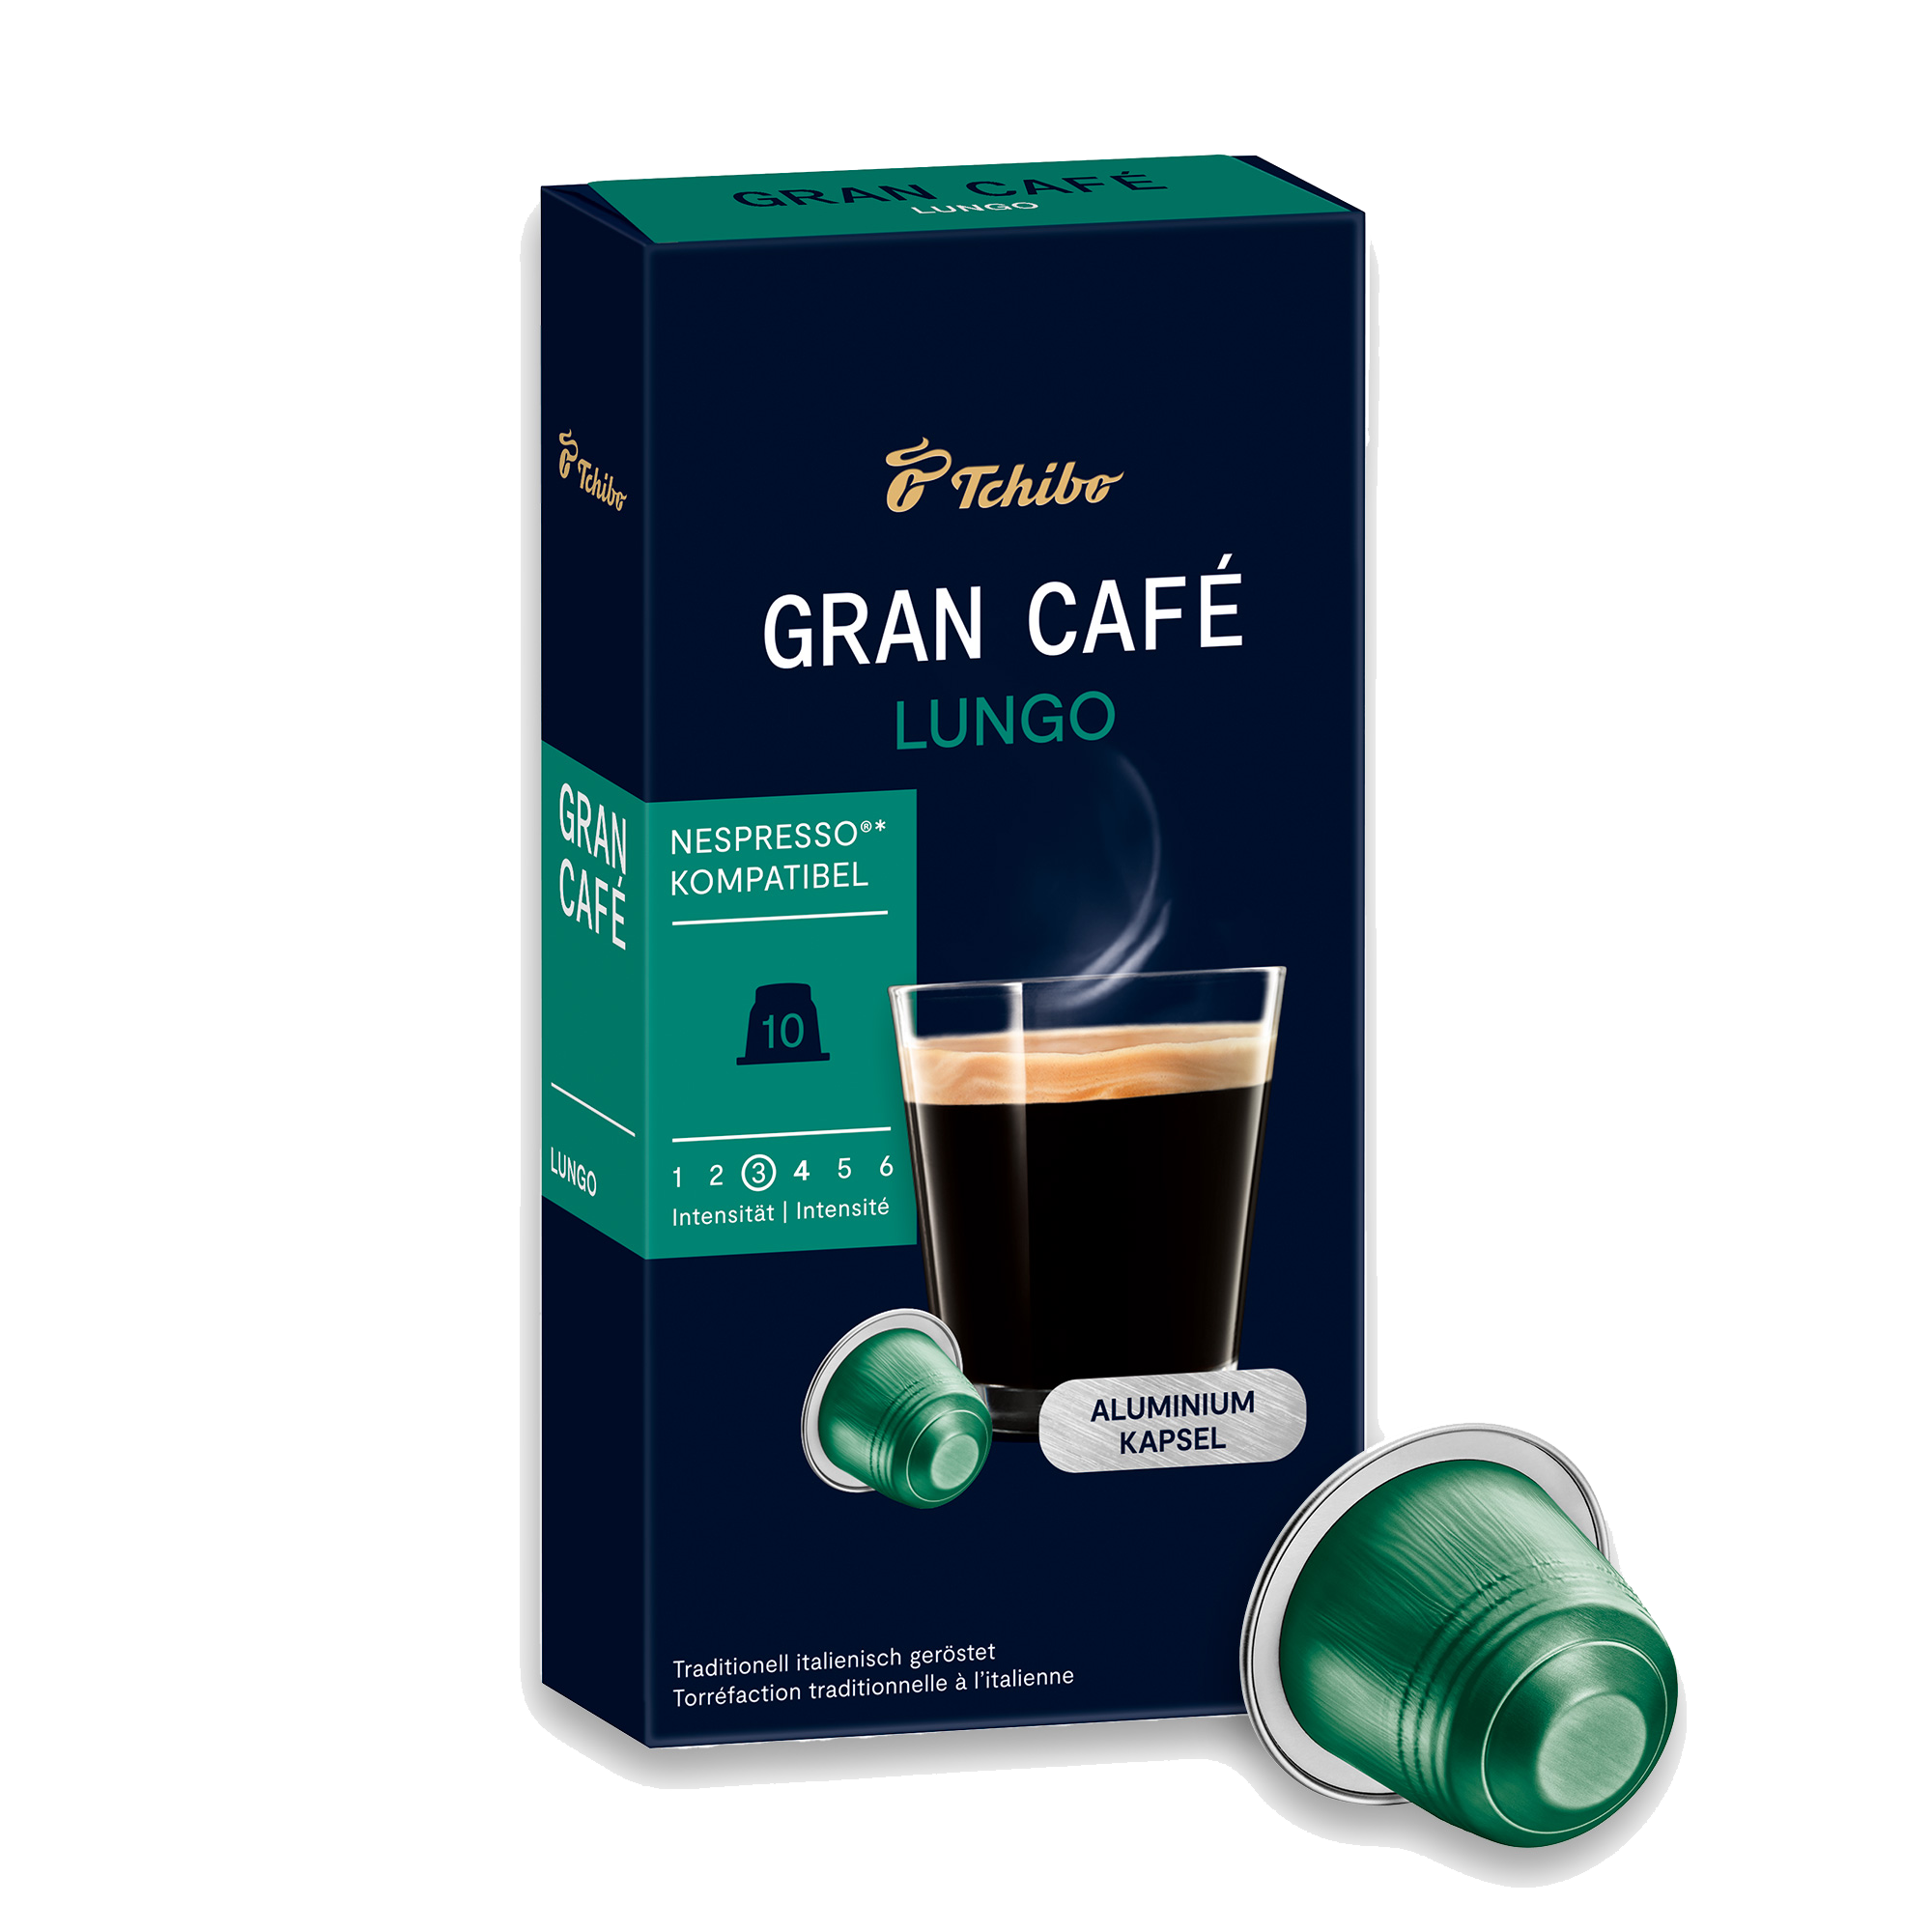 Gran Café Lungo - Lungo with balanced intense character and unique roasted  aroma